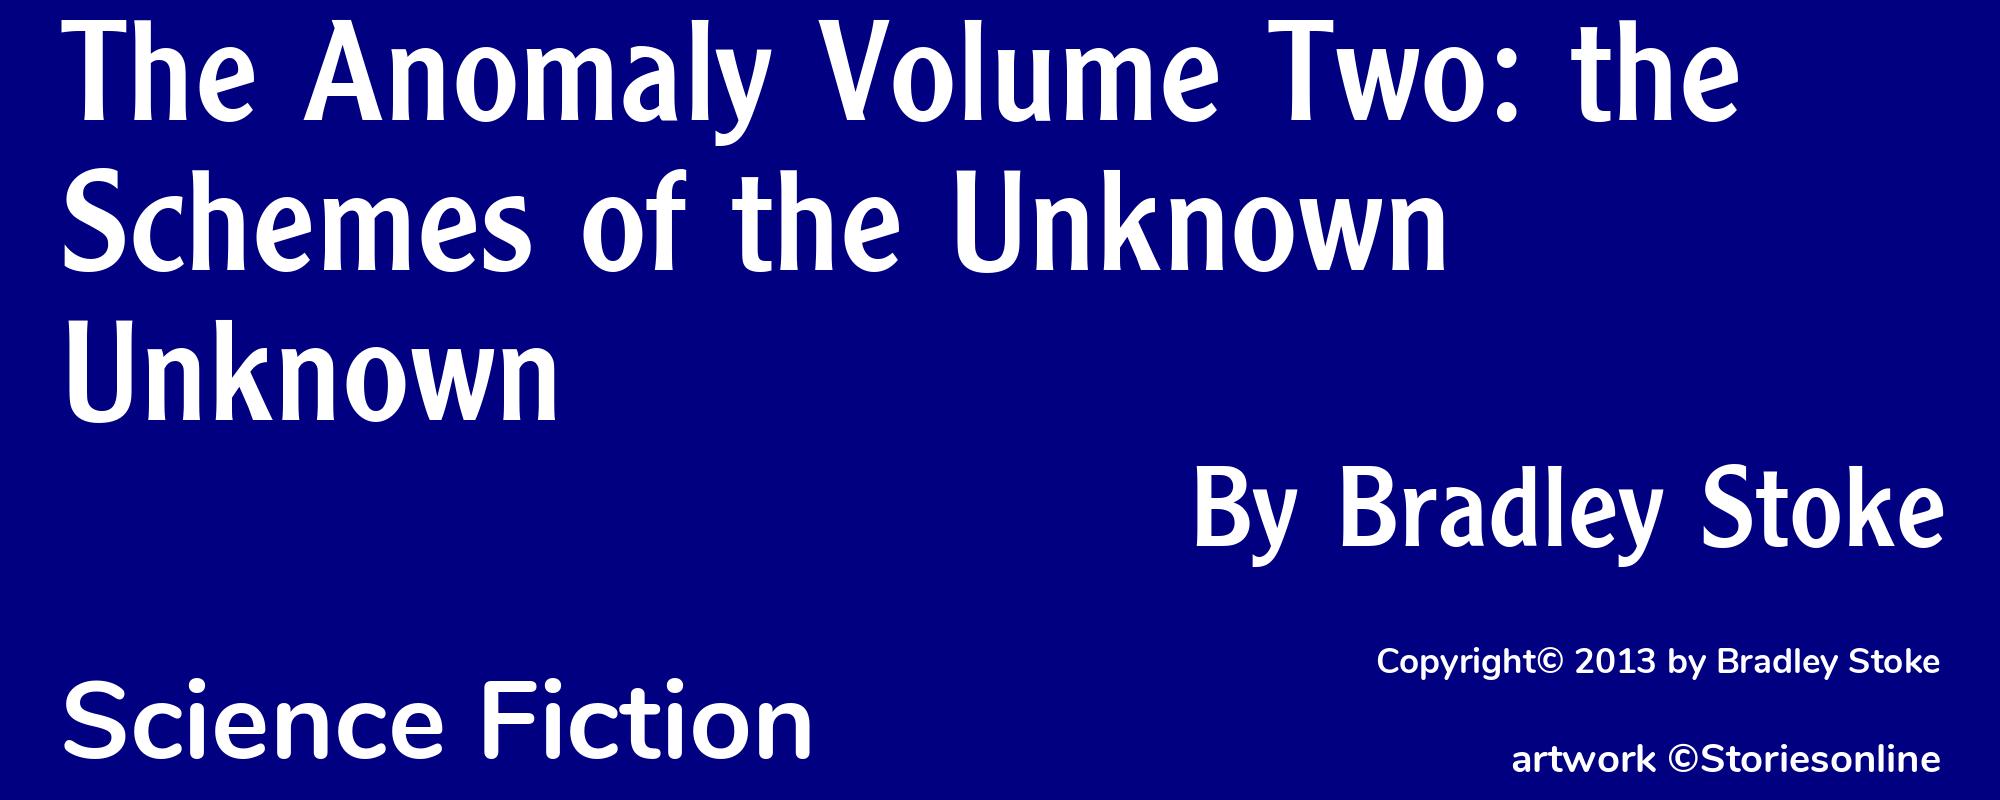 The Anomaly Volume Two: the Schemes of the Unknown Unknown - Cover